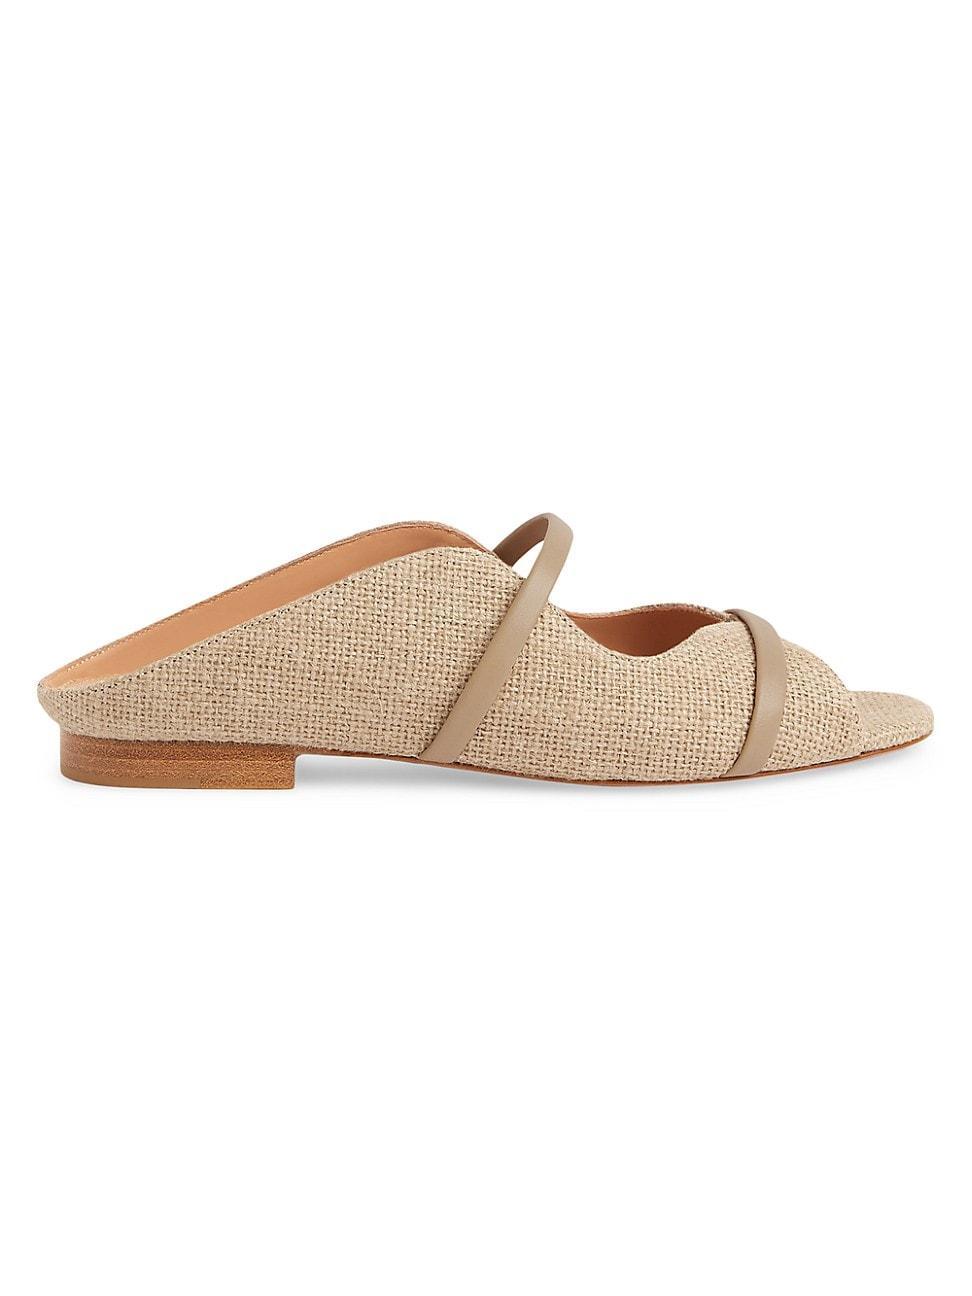 Norah Jute Two-Band Slide Sandals Product Image